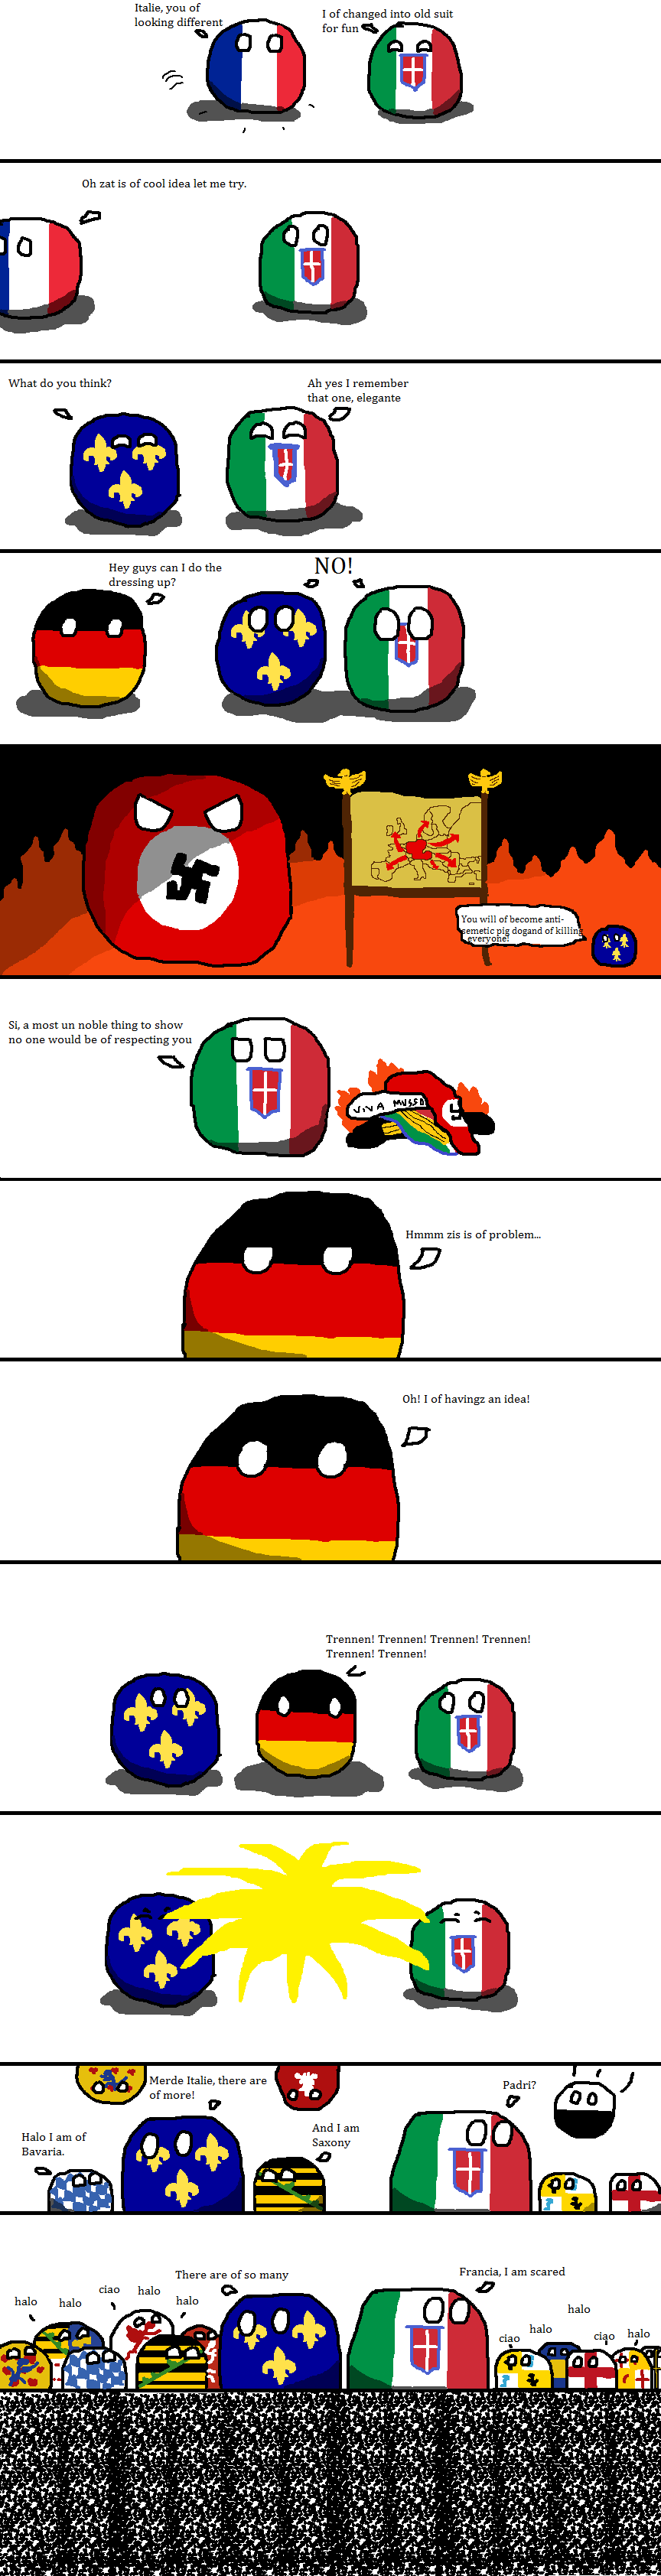 Any other Polandball nerds out there? - Warzone - Better than Hasbro's ...